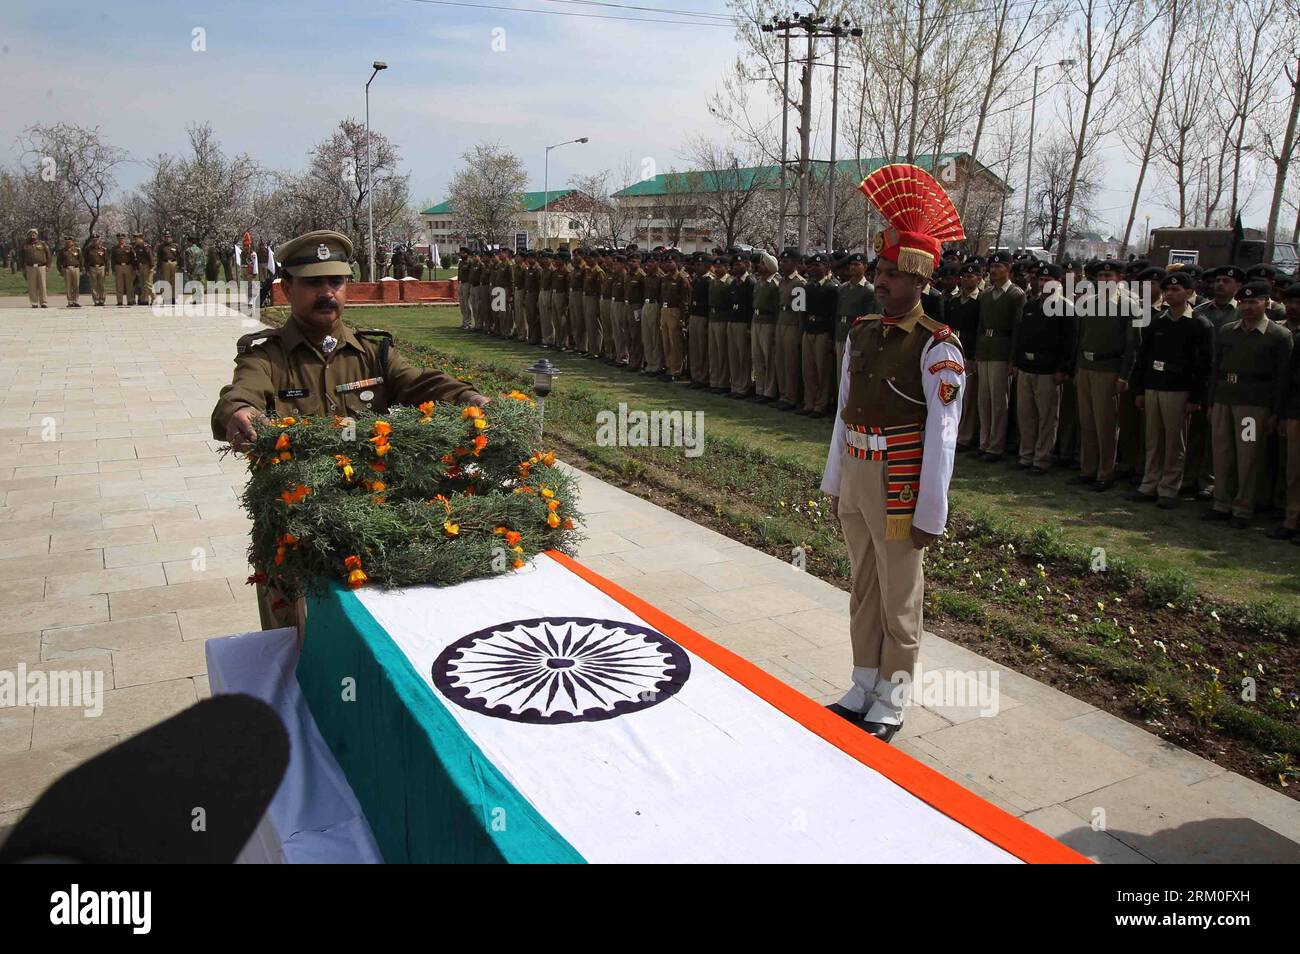 Bildnummer: 59410669  Datum: 22.03.2013  Copyright: imago/Xinhua (130322) -- SRINAGAR, March 22, 2013 (Xinhua) -- An officer of India s Border Security Force (BSF) lays a wreath to the coffin of a slain colleague at a camp in Srinagar, the summer capital of Indian-controlled Kashmir, March 22, 2013. An Indian border guard was killed and two others were wounded Thursday after gunmen ambushed their convoy in Nowgam locality of Srinagar. (Xinhua/Javed Dar) (ybg) KASHMIR-SRINAGAR-WREATH LAYING CEREMONY PUBLICATIONxNOTxINxCHN xns x0x 2013 quer premiumd      59410669 Date 22 03 2013 Copyright Imago Stock Photo